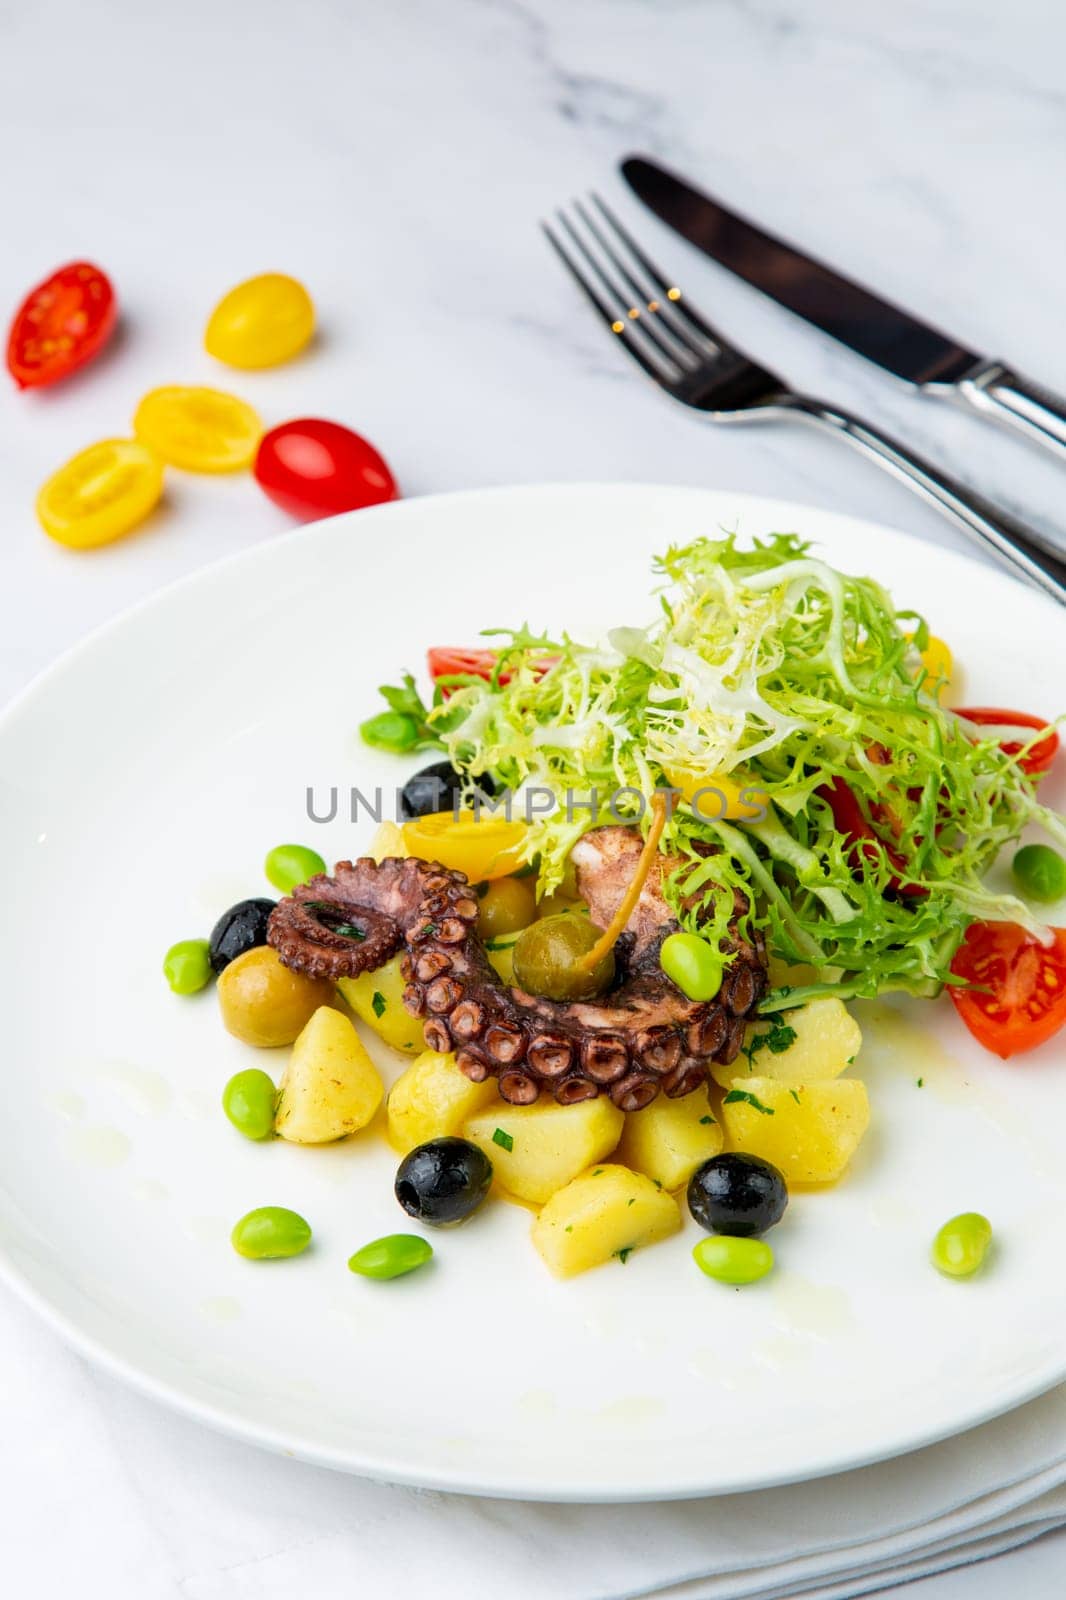 salad with olives, herbs, cherry tomatoes, potatoes and octopus tentacles